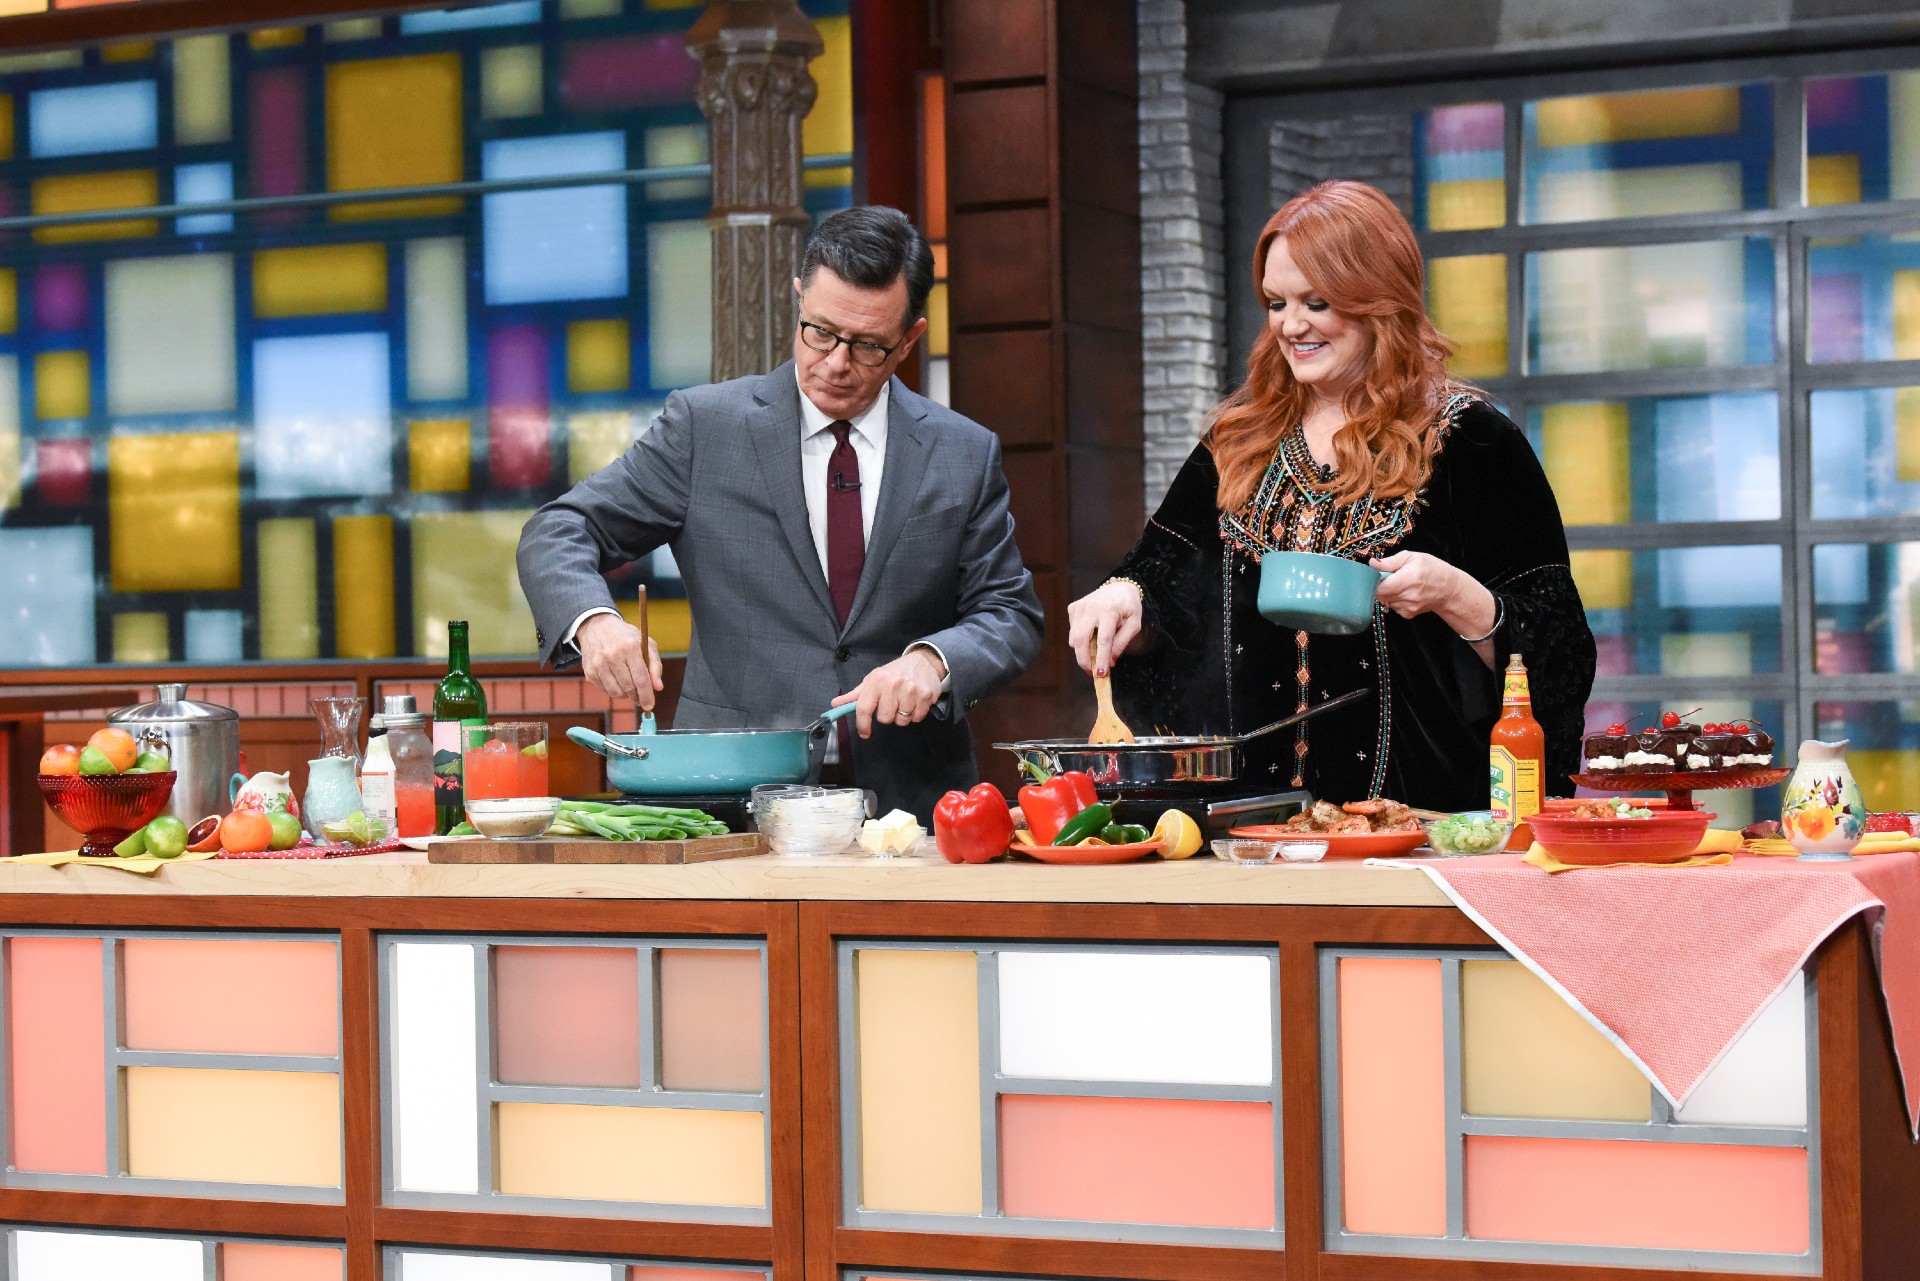 Stephen Colbert stirs food in a pan while Ree Drummond smiles and holds a blue pot.